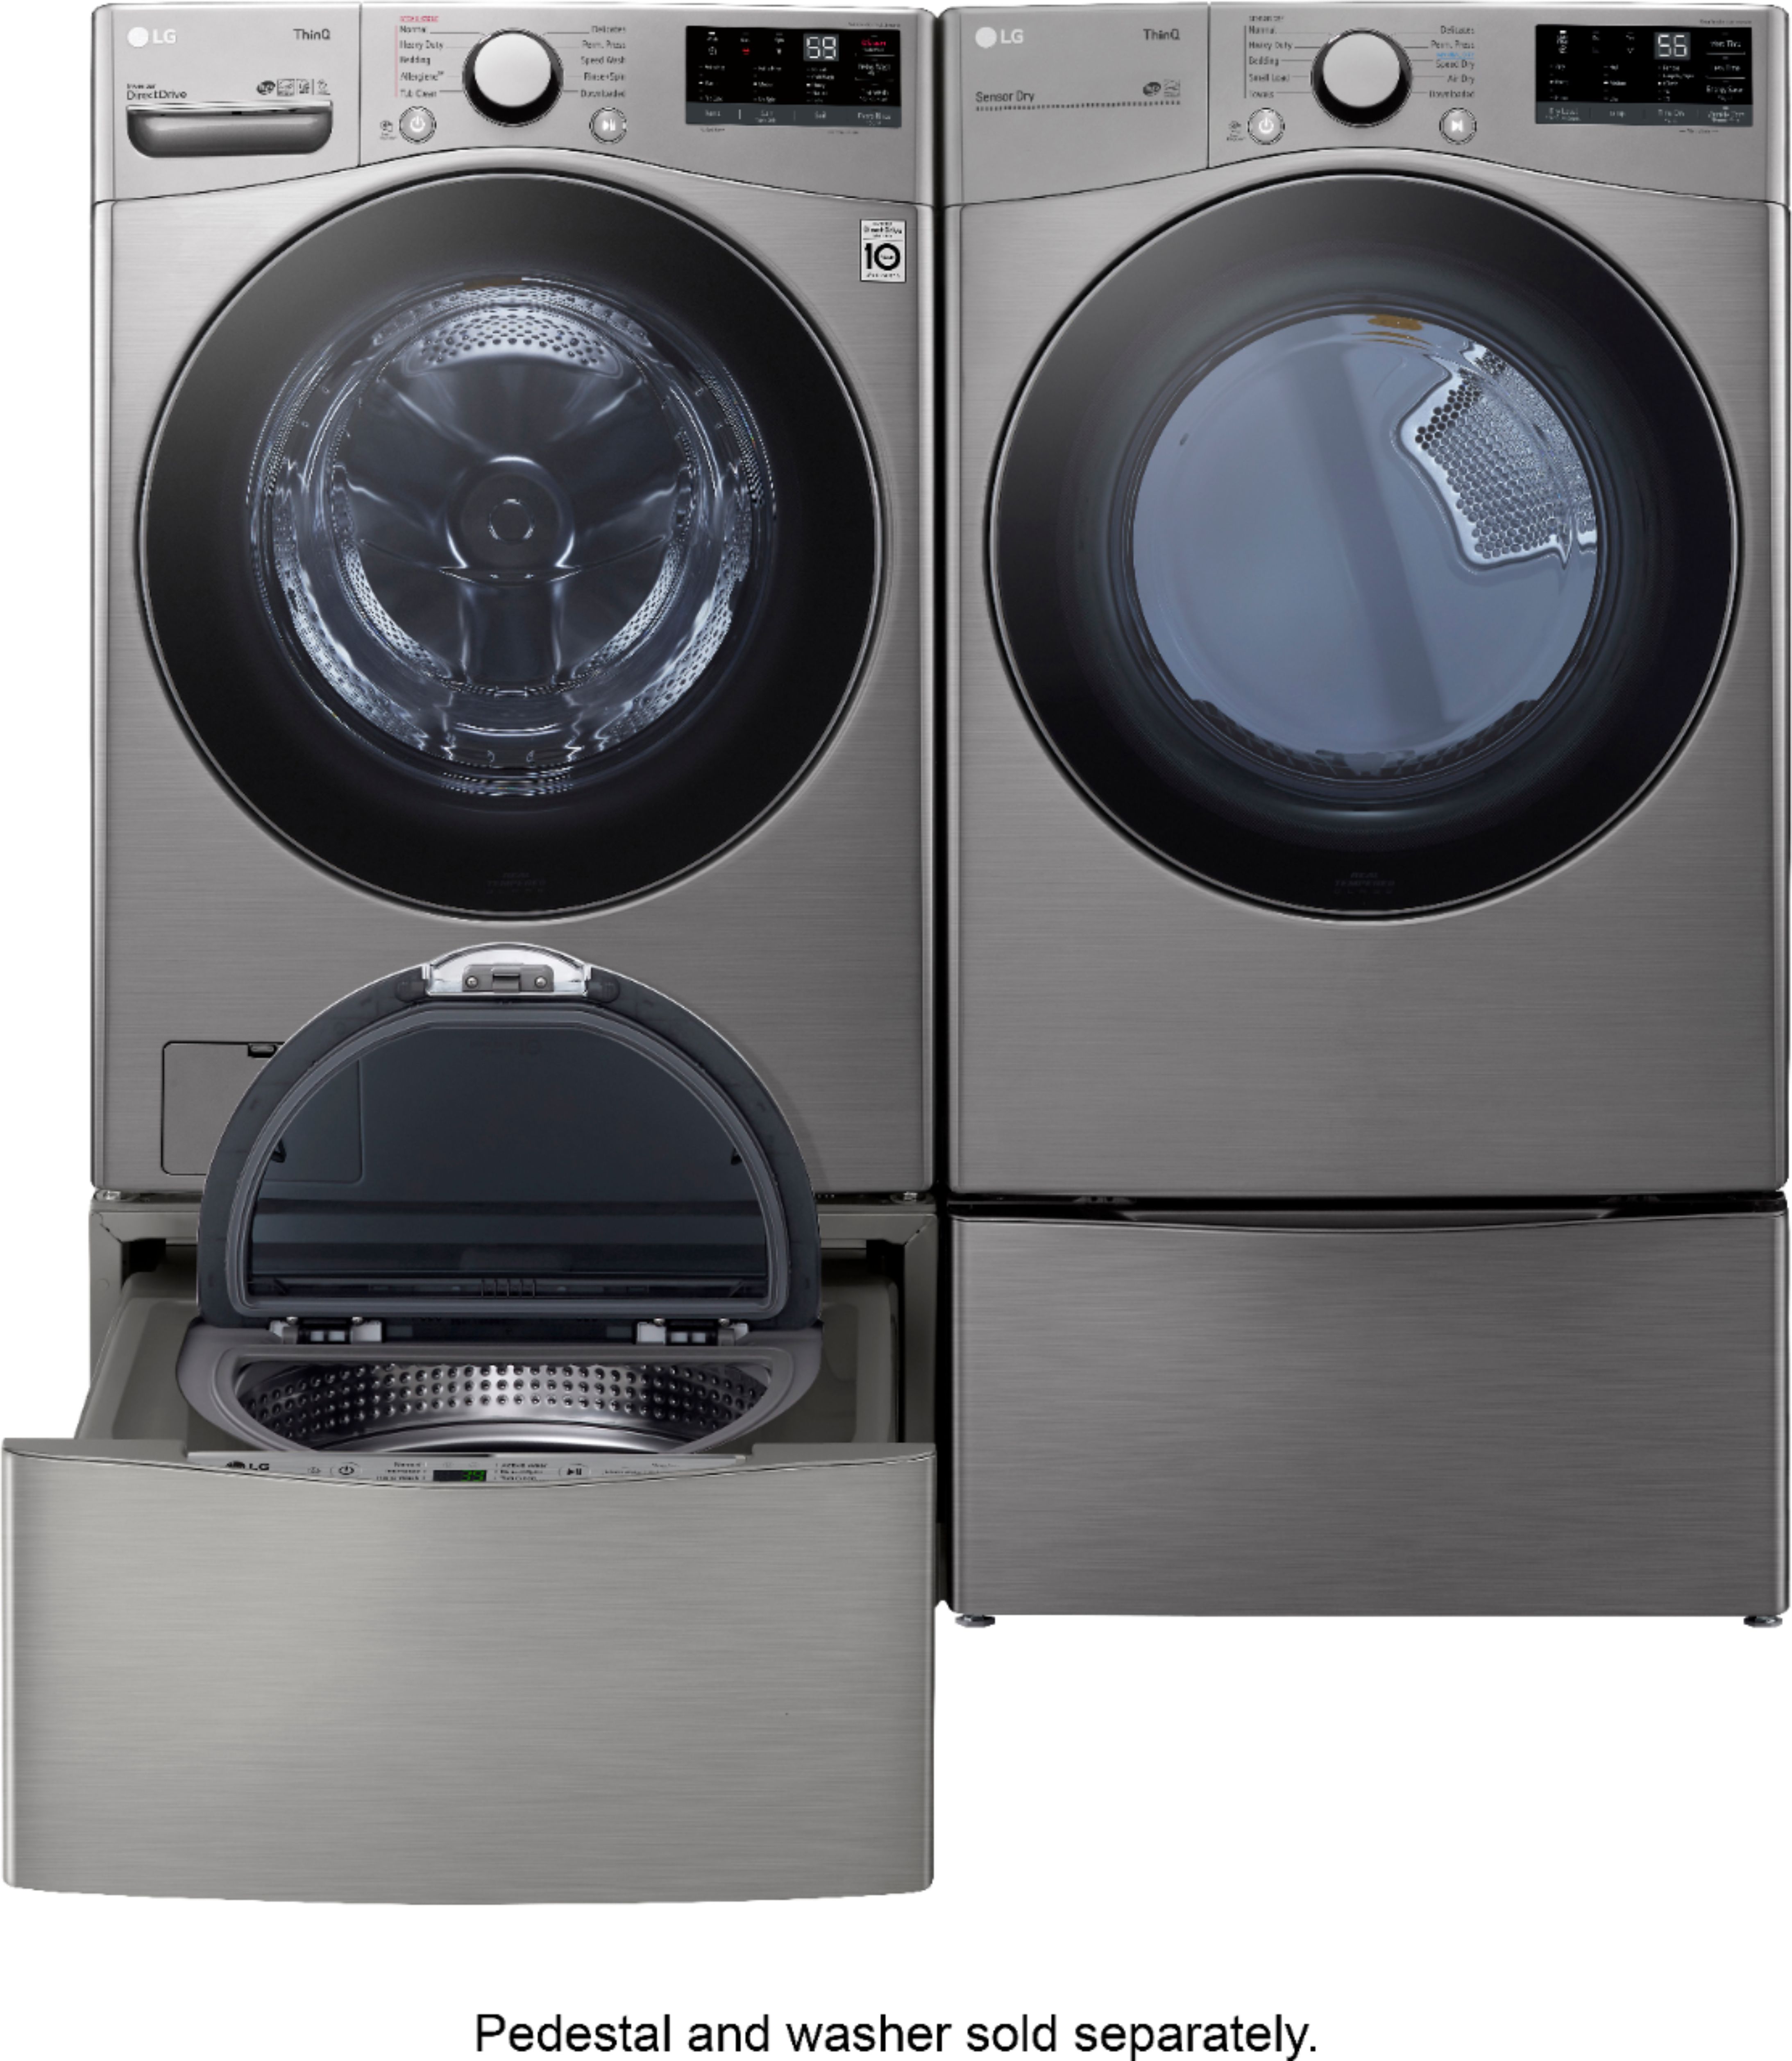 7.4 cu. ft. Ultra Large Capacity Electric Dryer